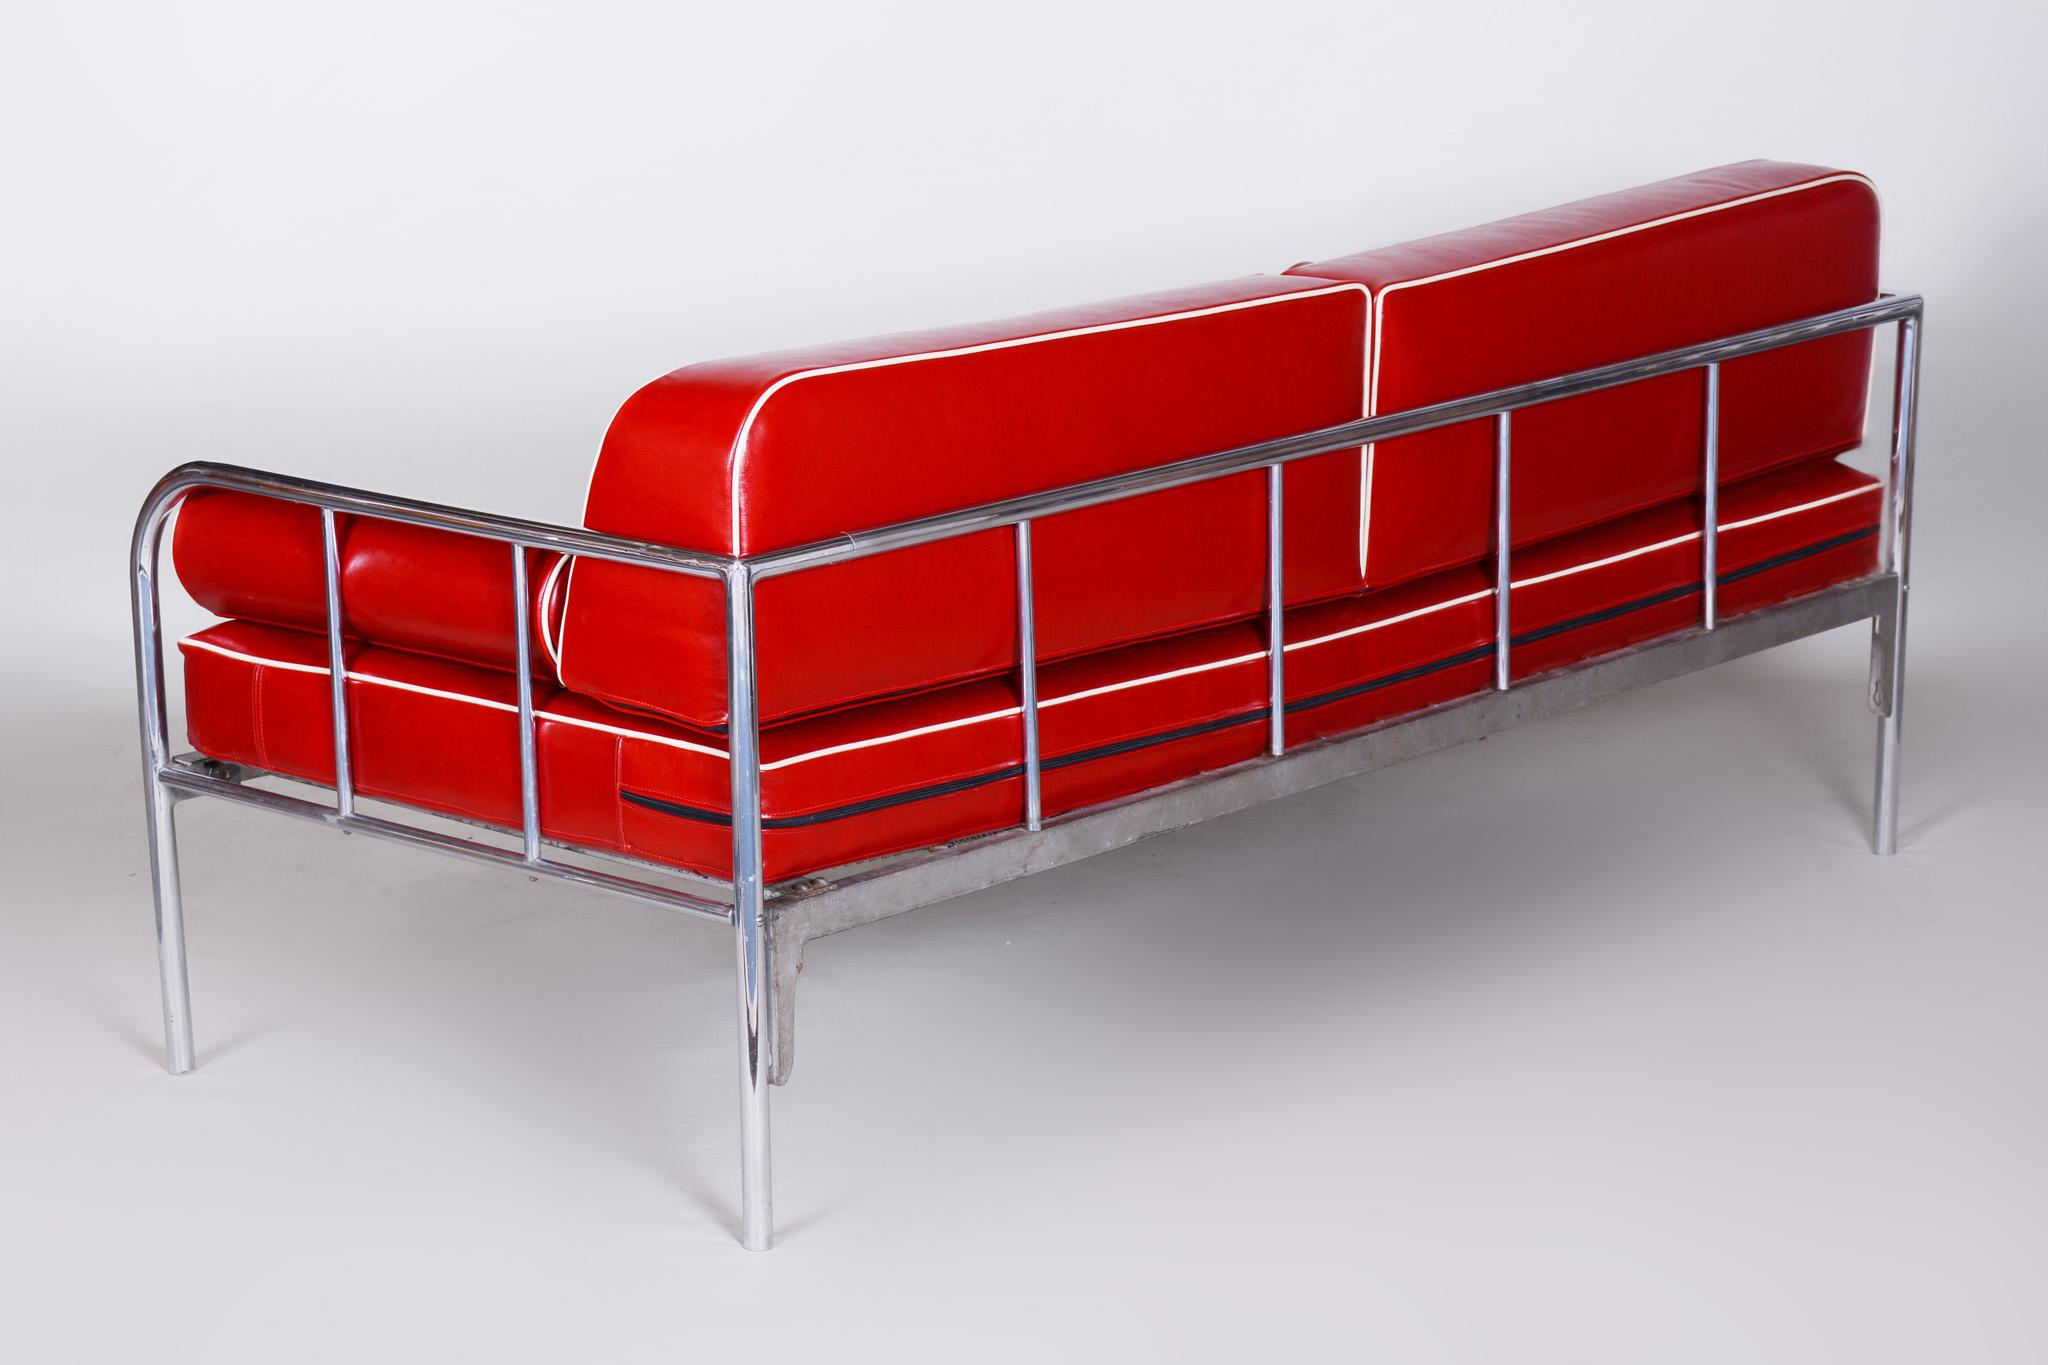 Fully Restored Bauhaus Leather and Chrome Sofa by Vichr a Spol, 1930s Czechia For Sale 2